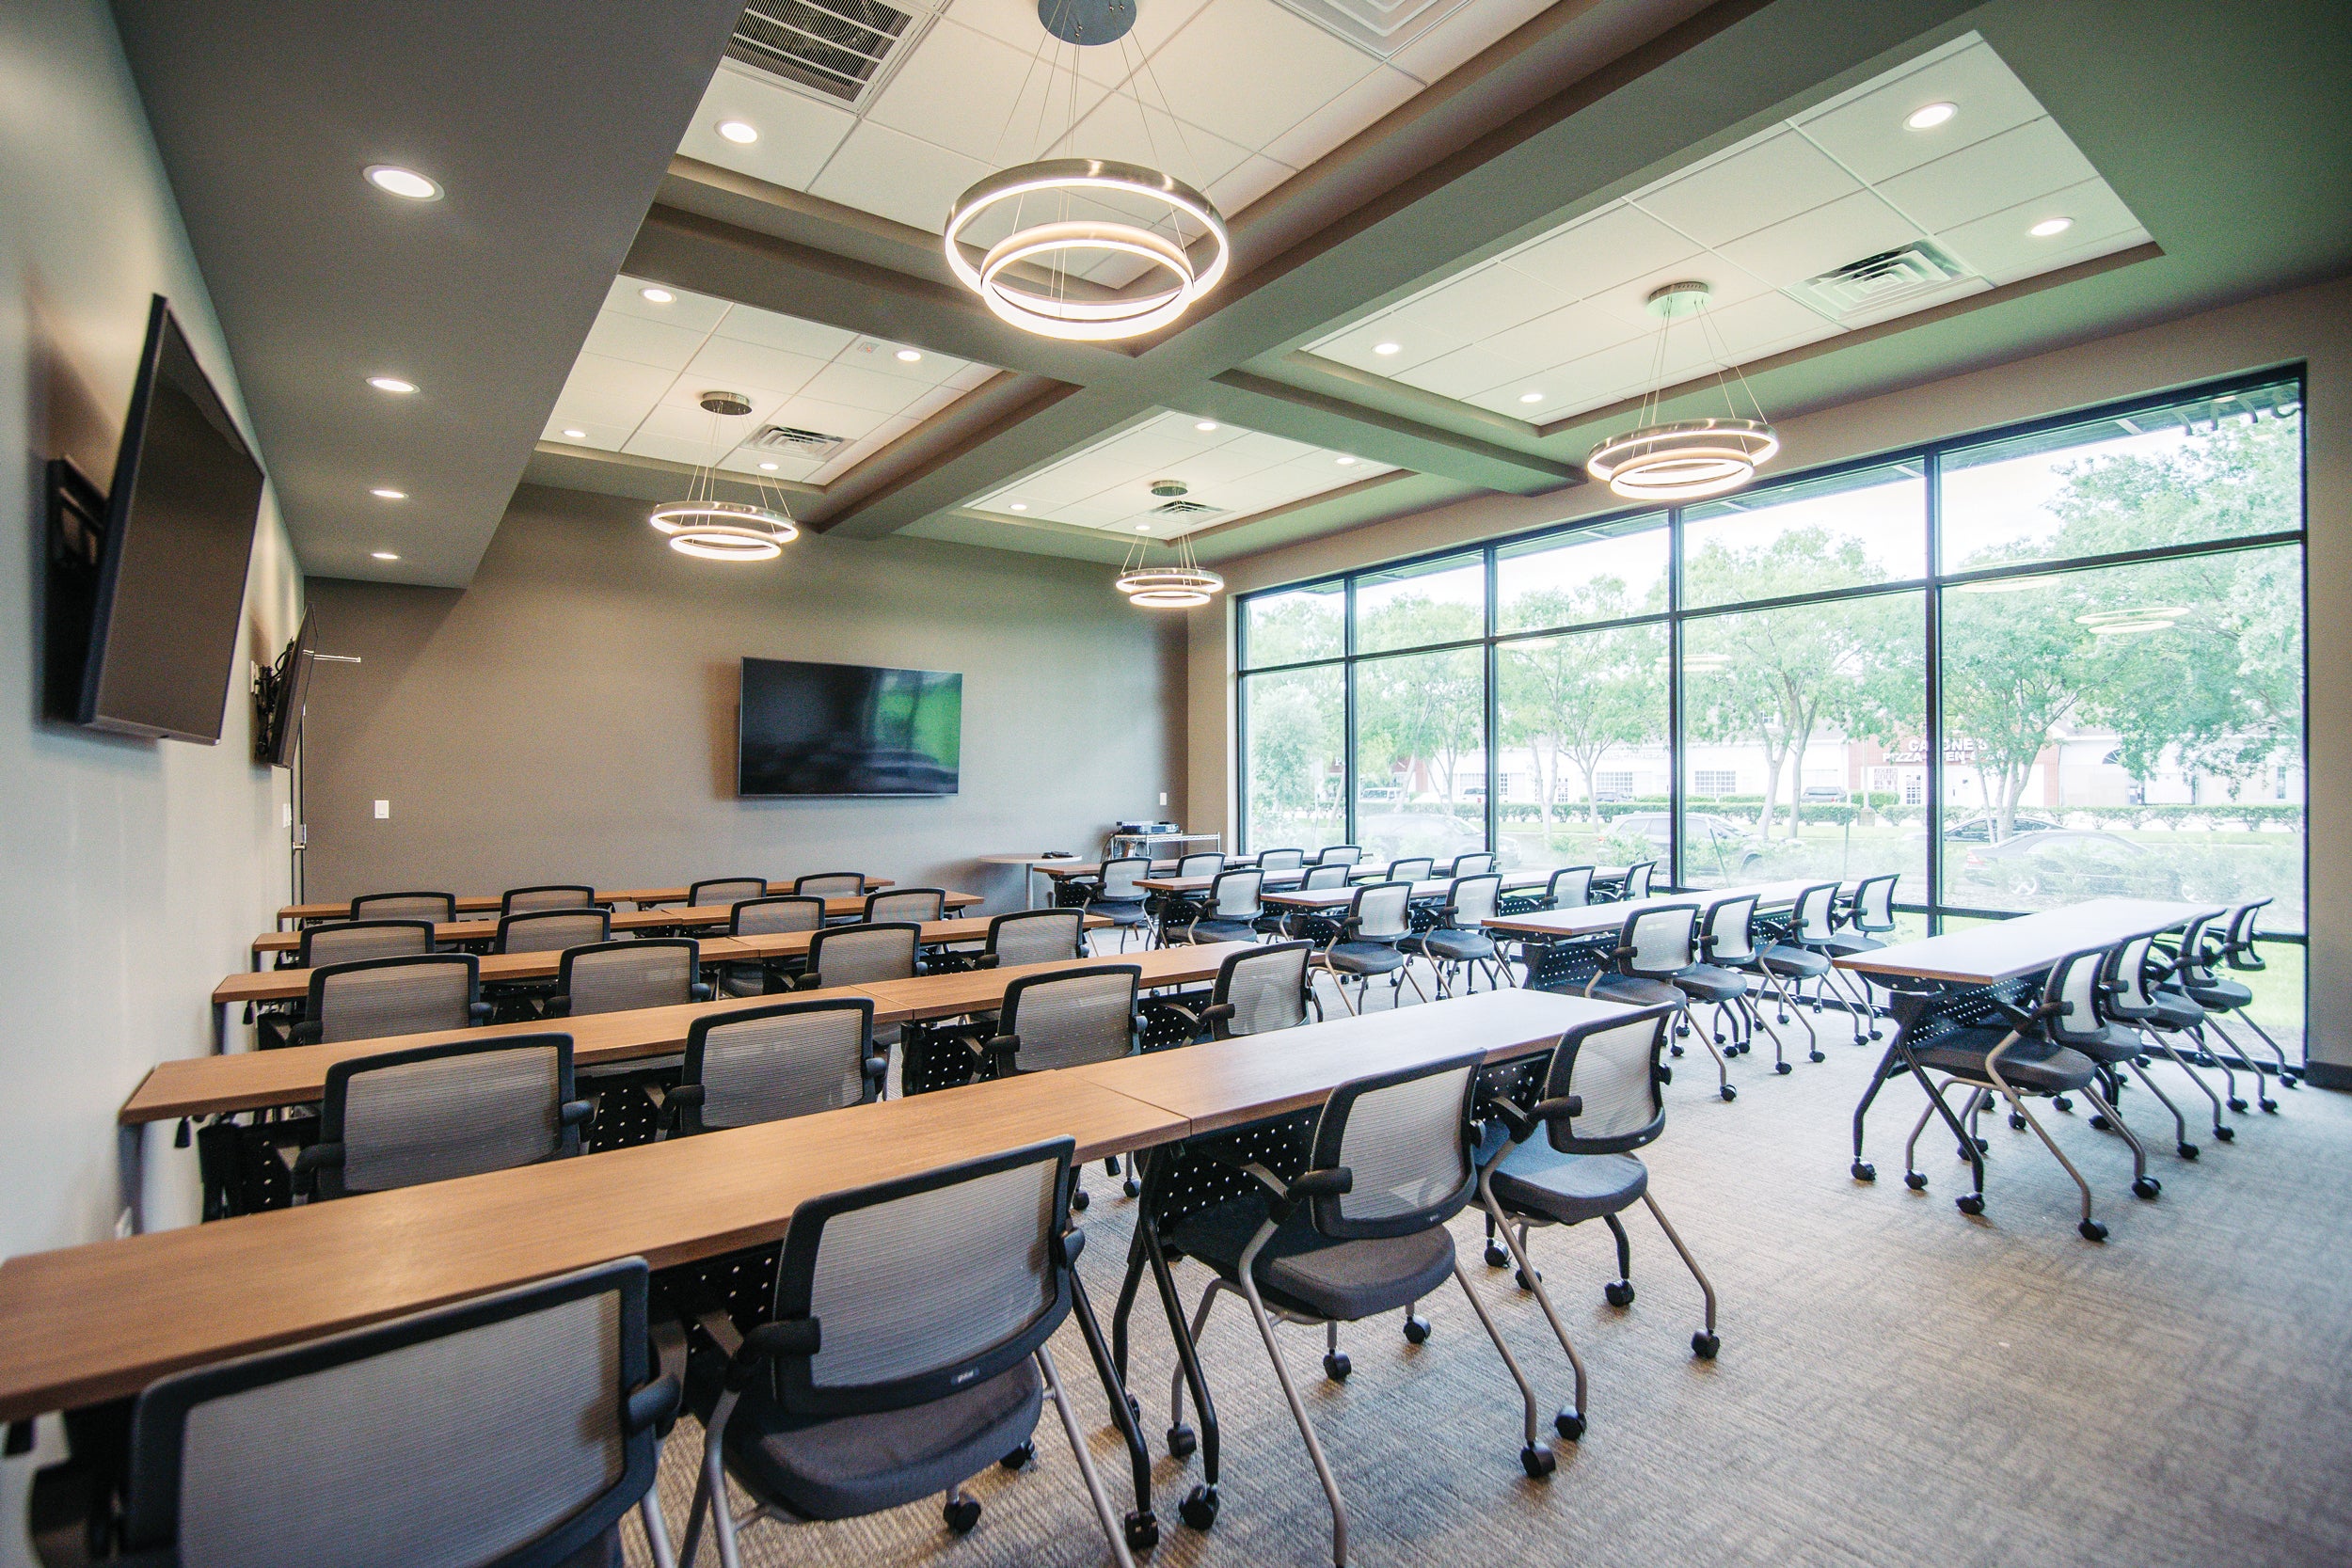 Fort Bend Dental Continuing Education Facility